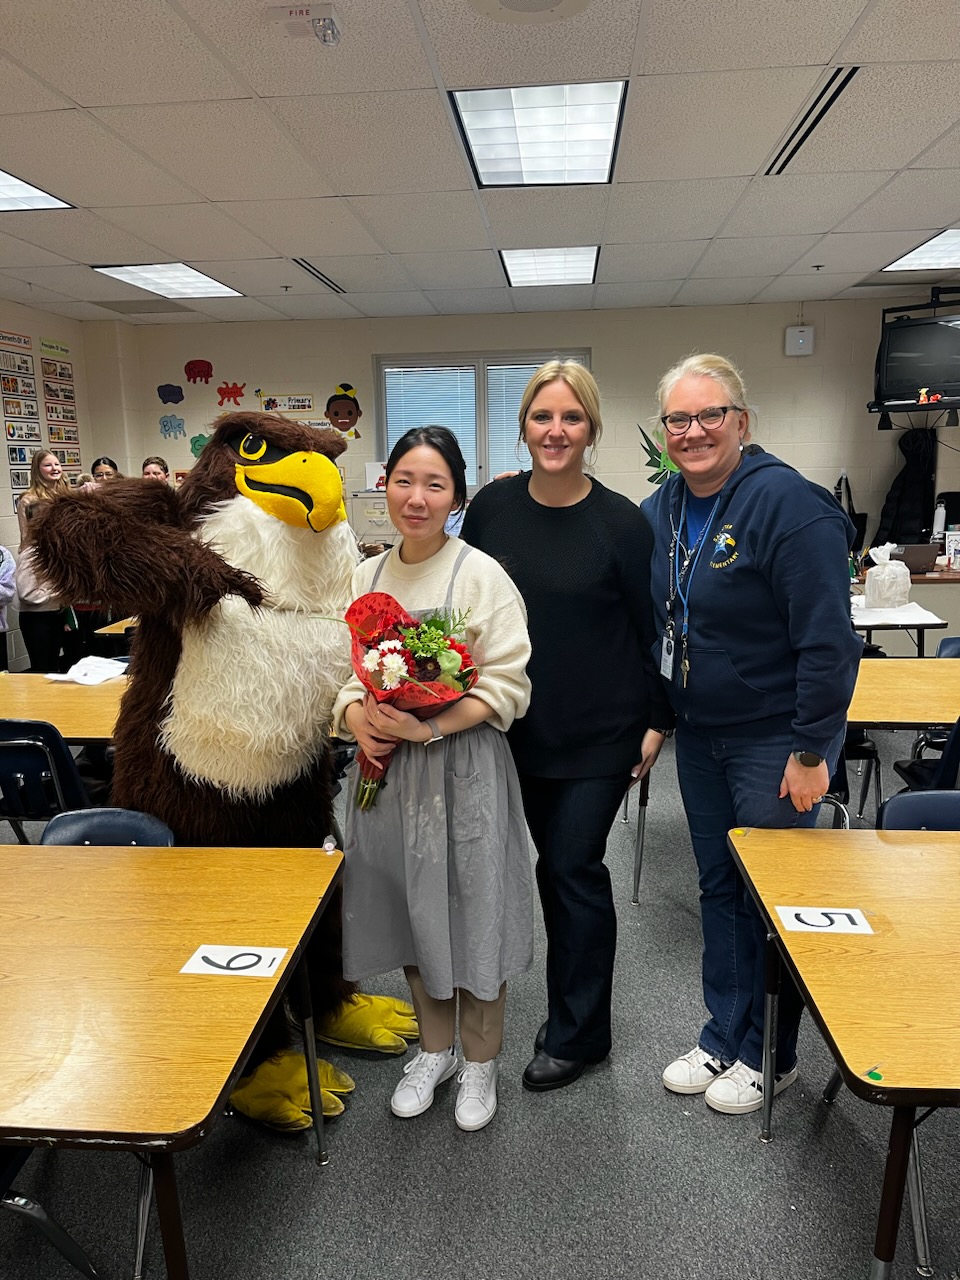 The Falcon, Ms. Sung, Ms. Jankovich, and Ms. Kleiber